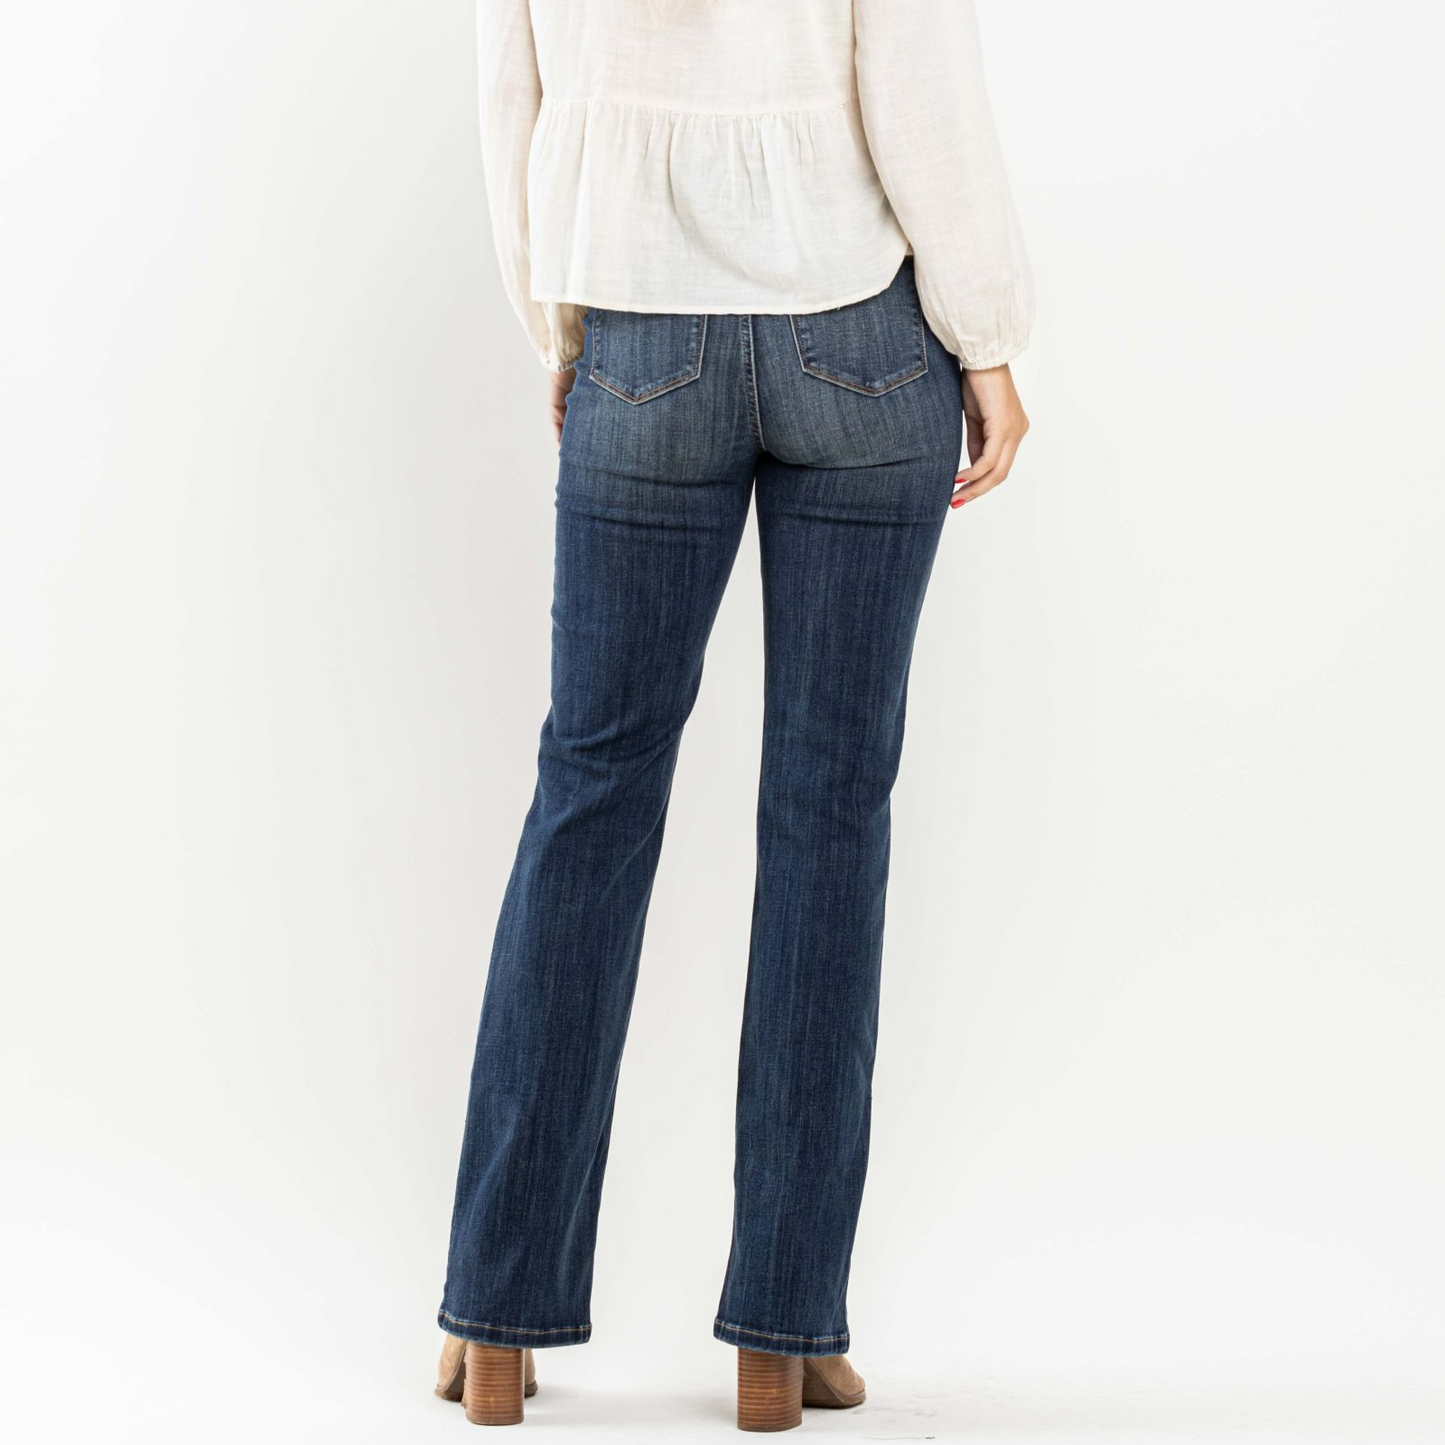 High Waisted Vintage Pull on Slim Boot Cut Jeans